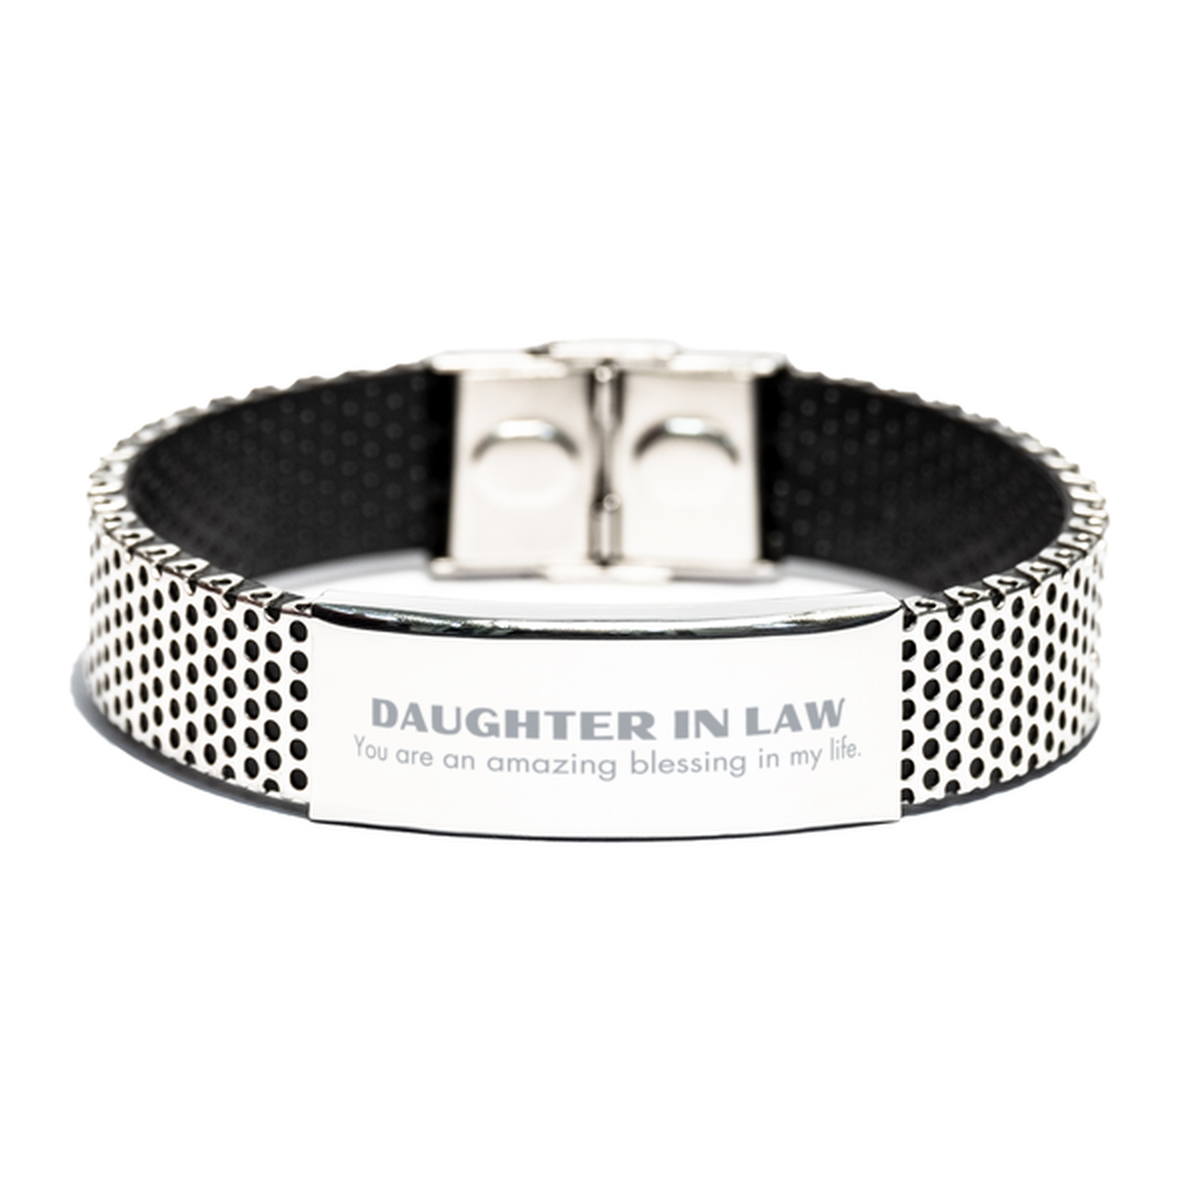 Daughter In Law Stainless Steel Bracelet, You are an amazing blessing in my life, Thank You Gifts For Daughter In Law, Inspirational Birthday Christmas Unique Gifts For Daughter In Law